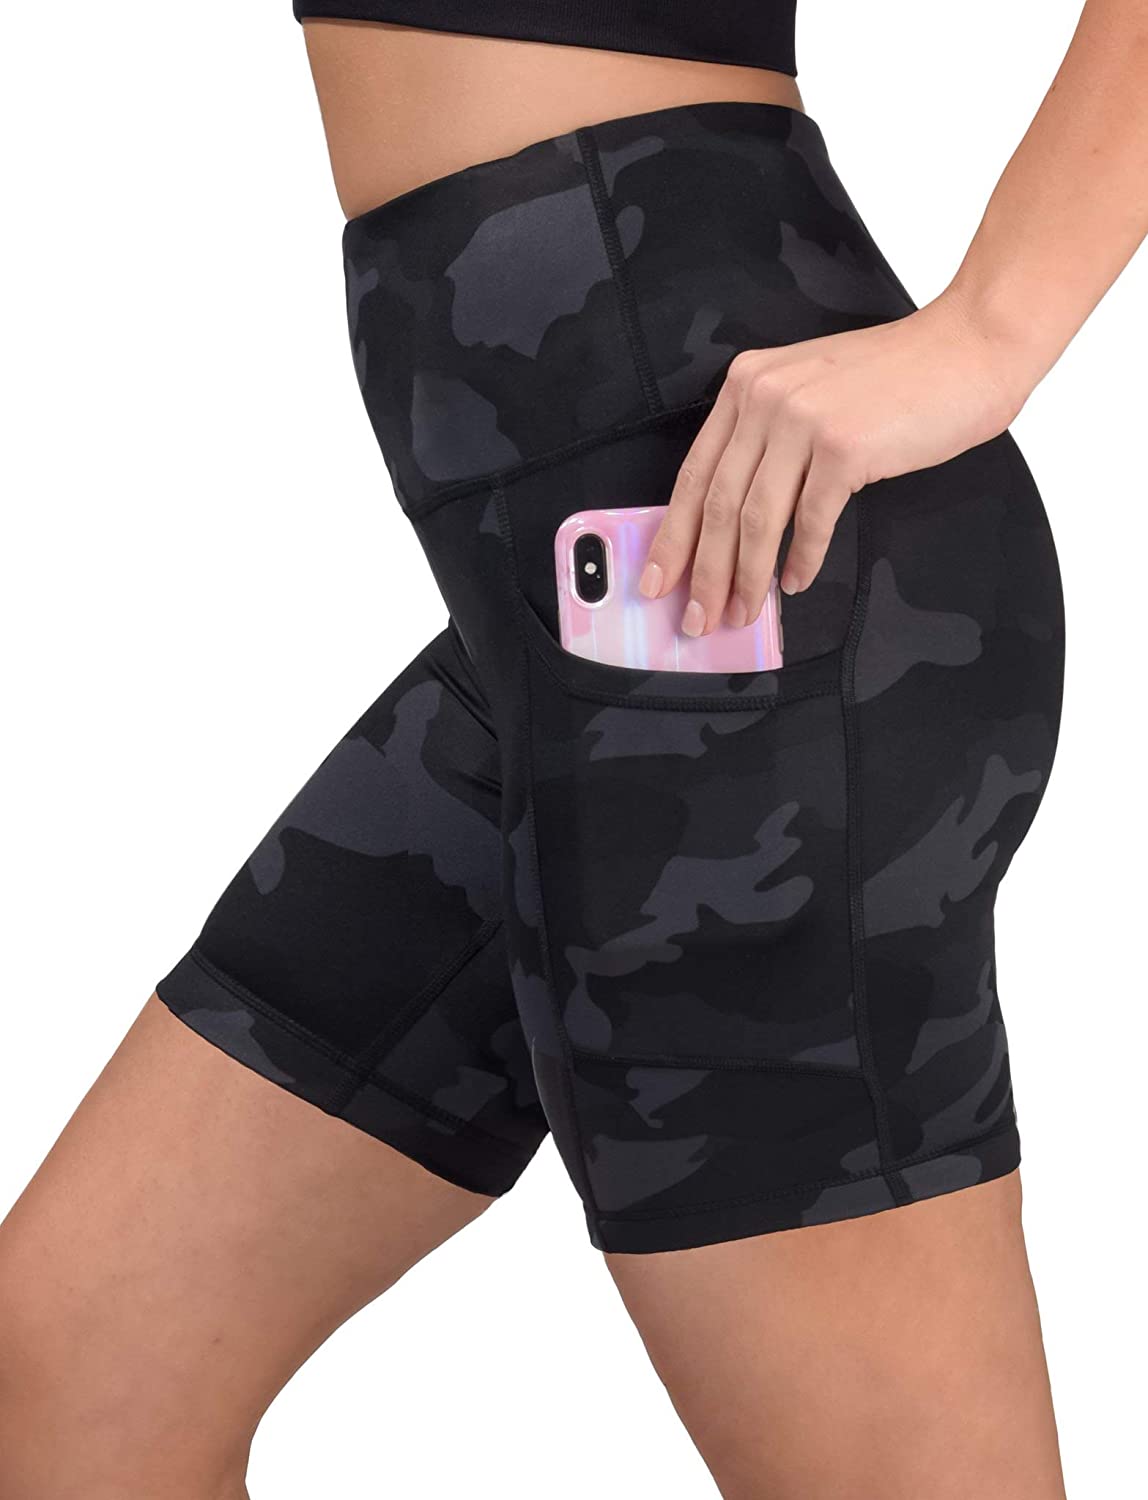 OXZNO Women’s High Waist Workout Shorts Non See-Through Yoga Biker Athletic Shorts with Pockets for Women 